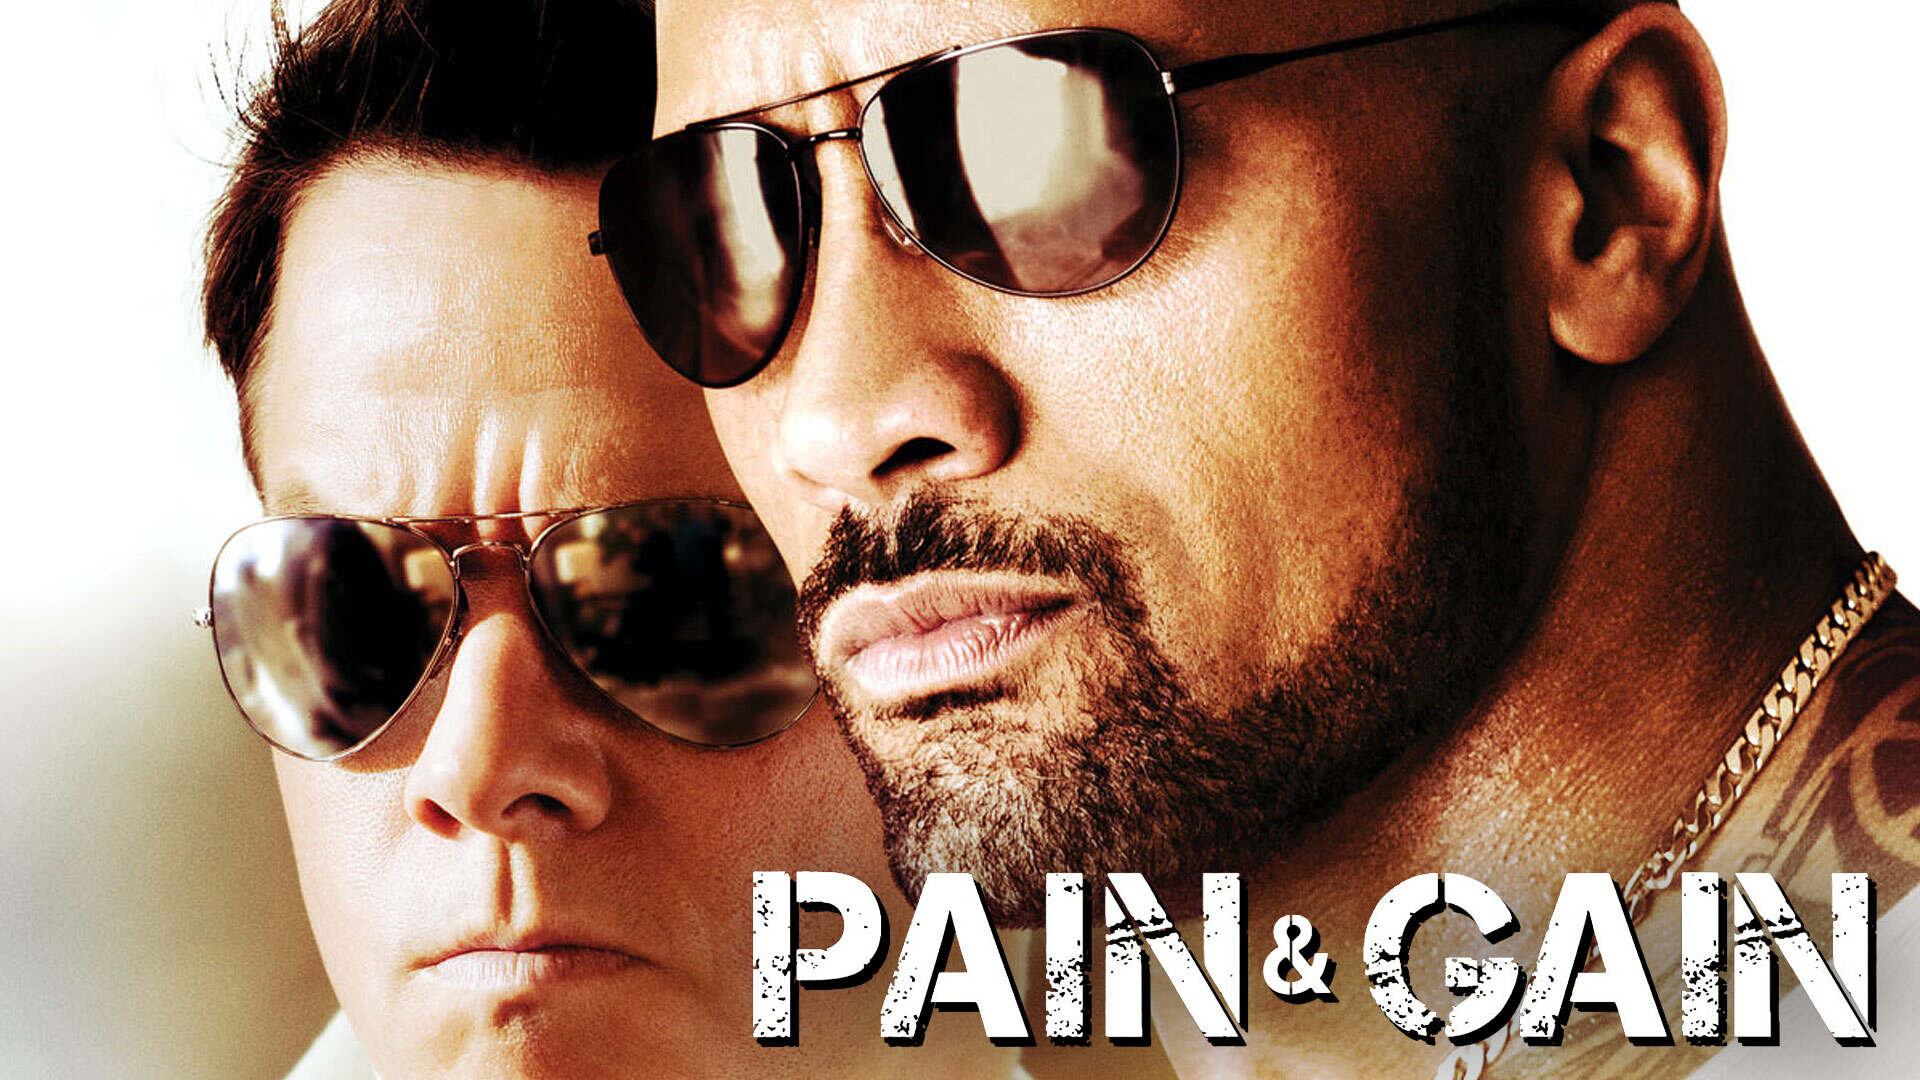 Pain and gain